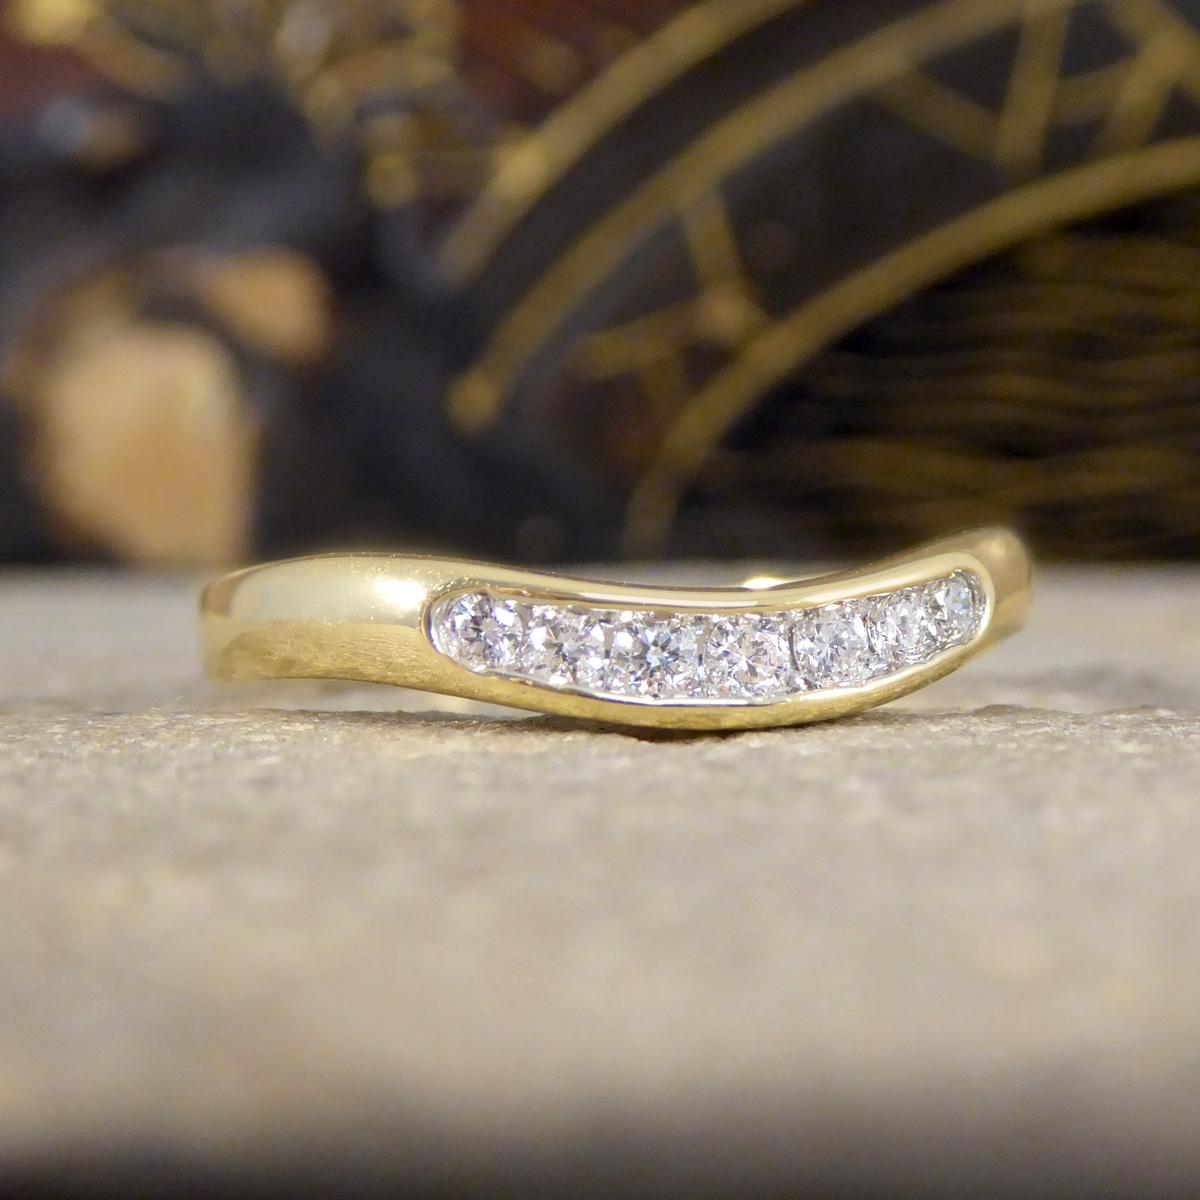 Such a beautiful Diamond set curved wishbone ring in Yellow Gold, designed to sit alone or perfectly, elegantly cradling your engagement ring. Crafted in lustrous 9ct Yellow Gold, this exquisite ring features a unique wishbone shape that curves